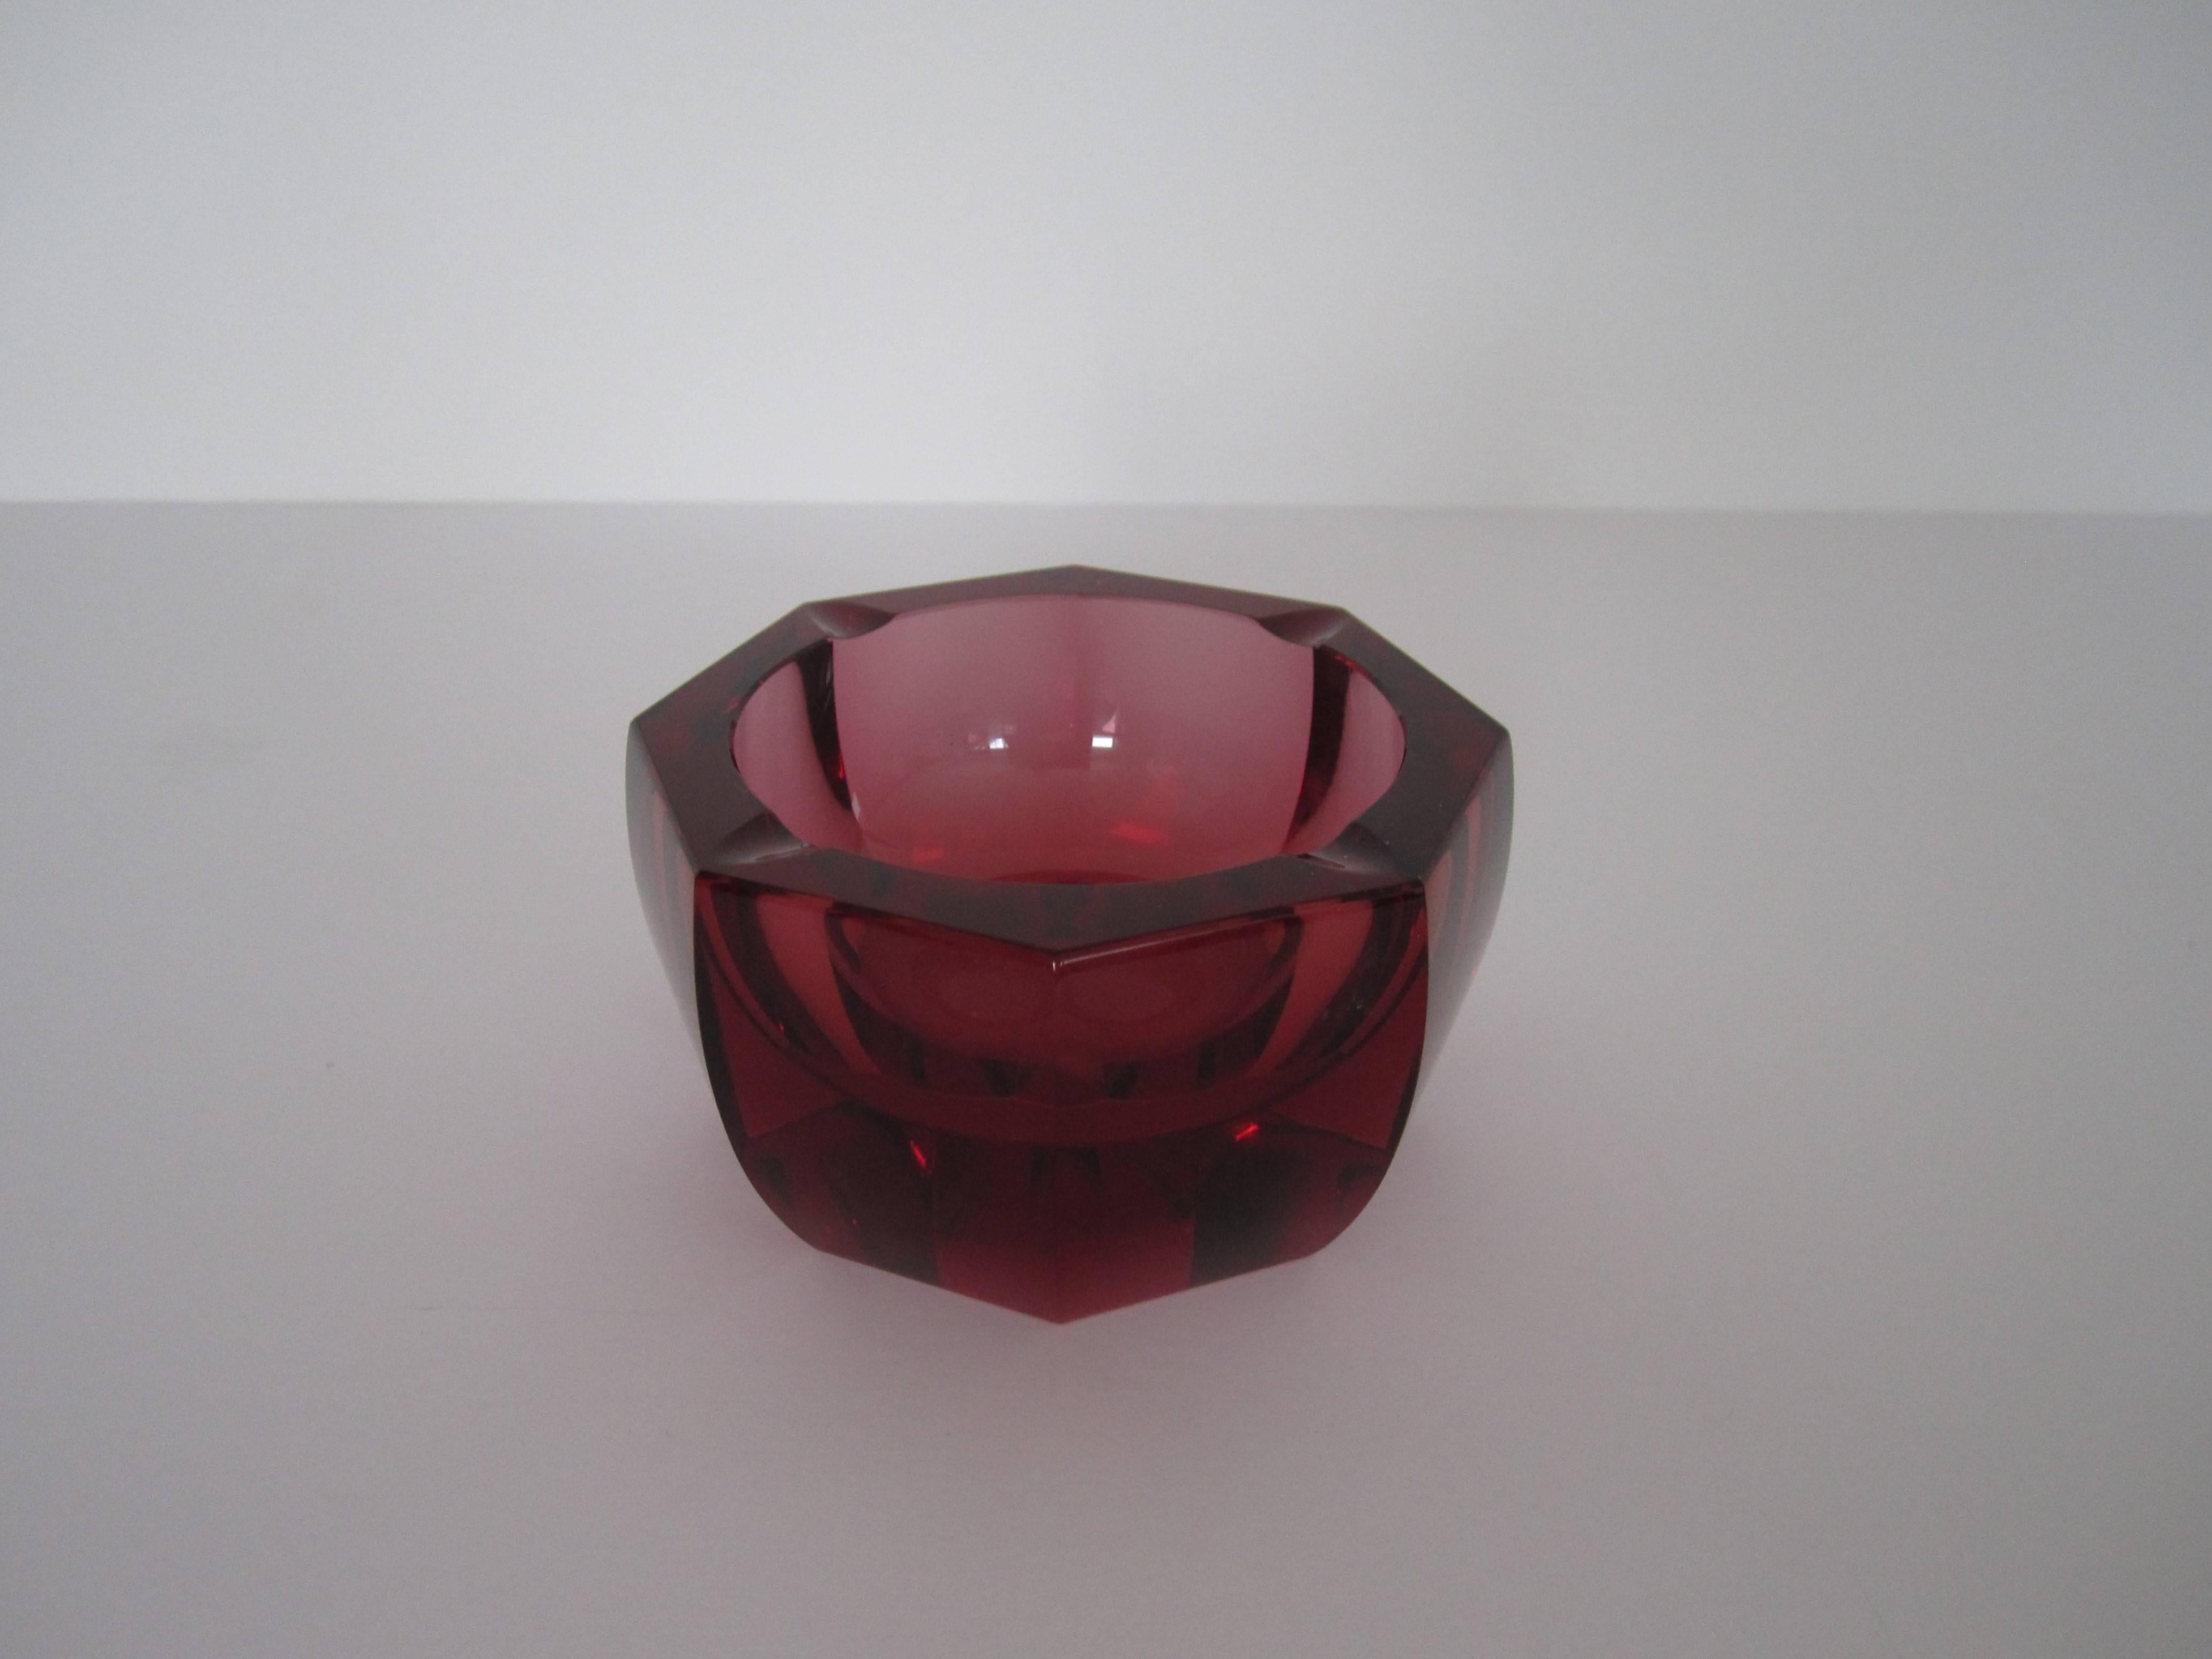 Gorgeous Red Octagonal Crystal Bowl or Ashtray by Moser 2